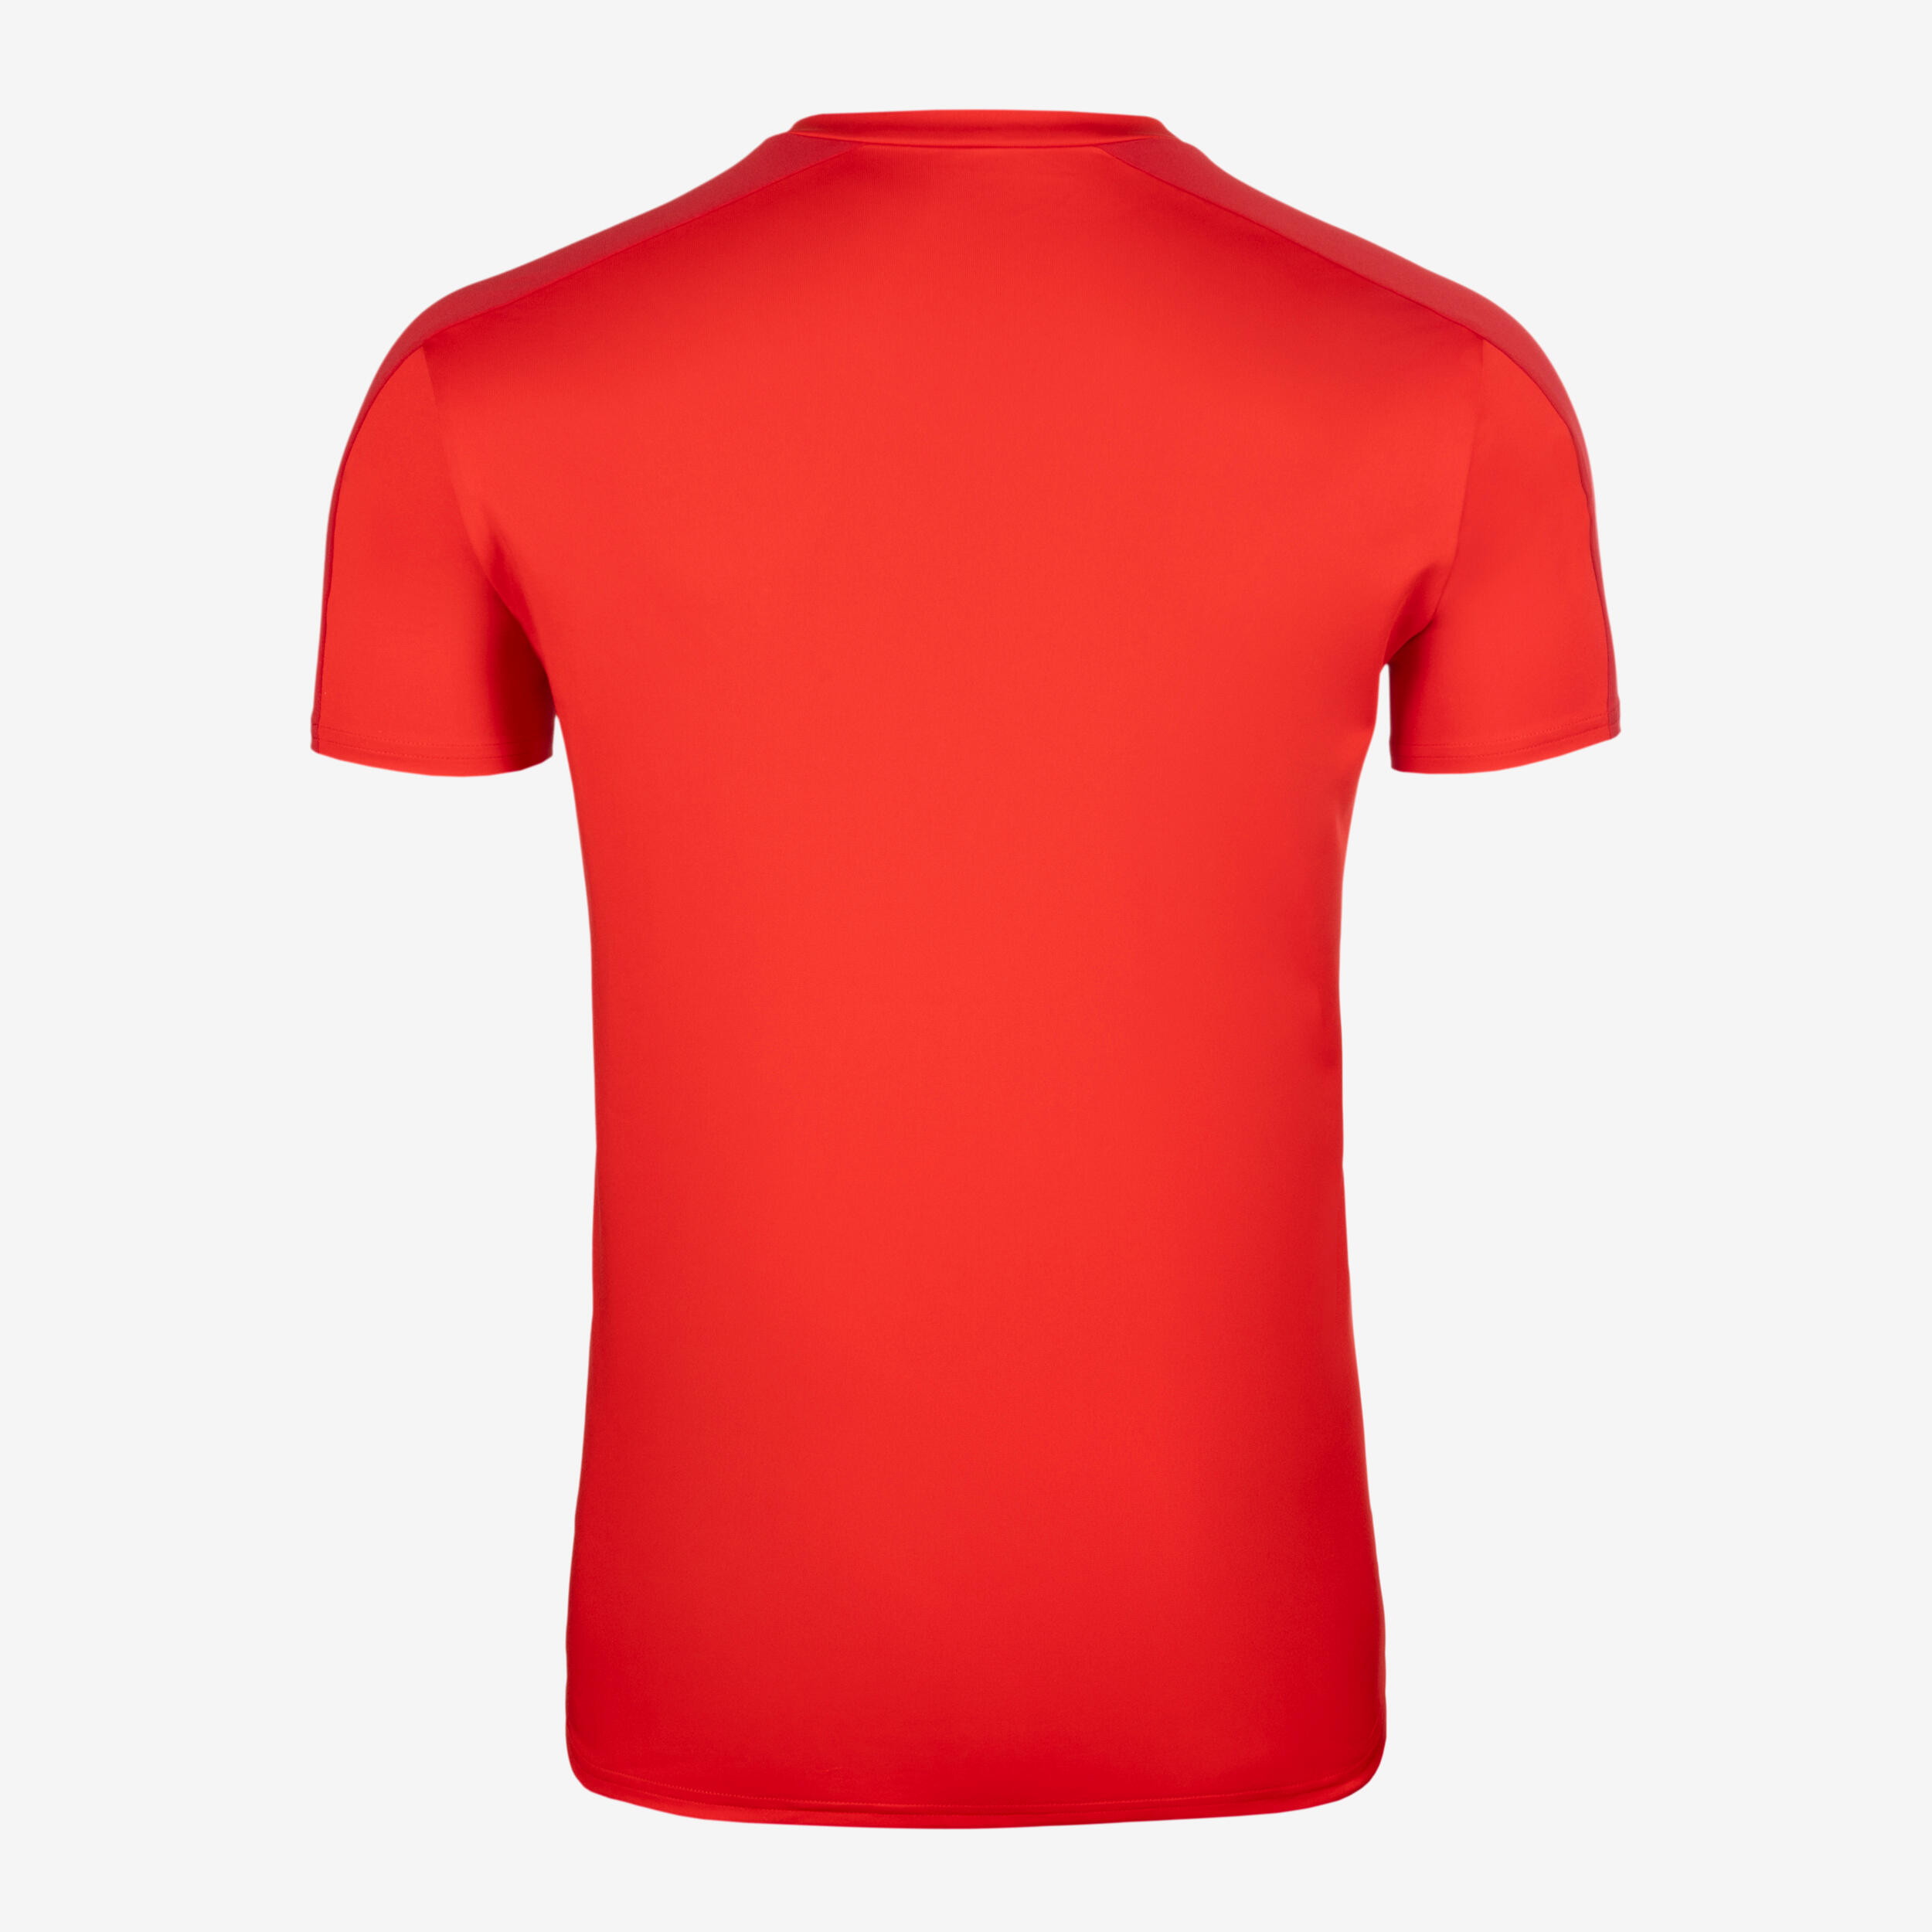 Adult Short-Sleeved Football Shirt Essential - Red 5/5